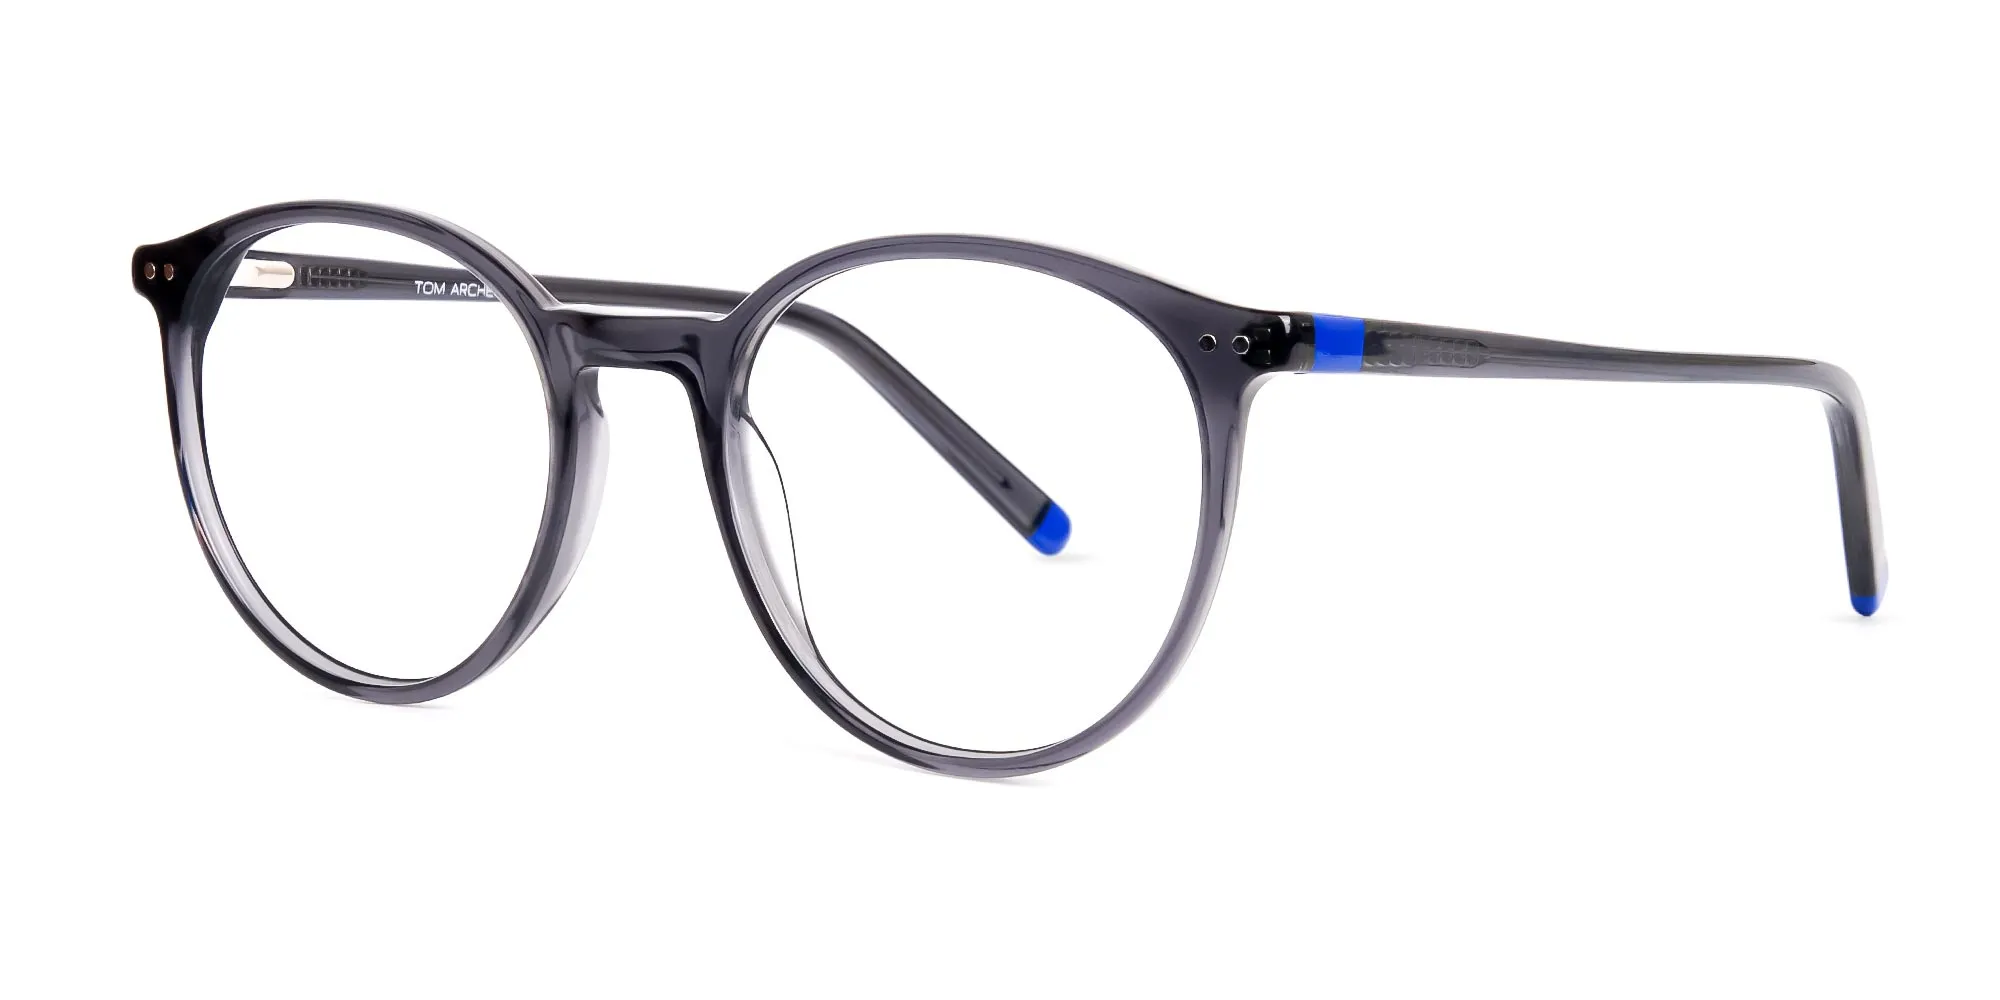 grey and blue round glasses frames-2